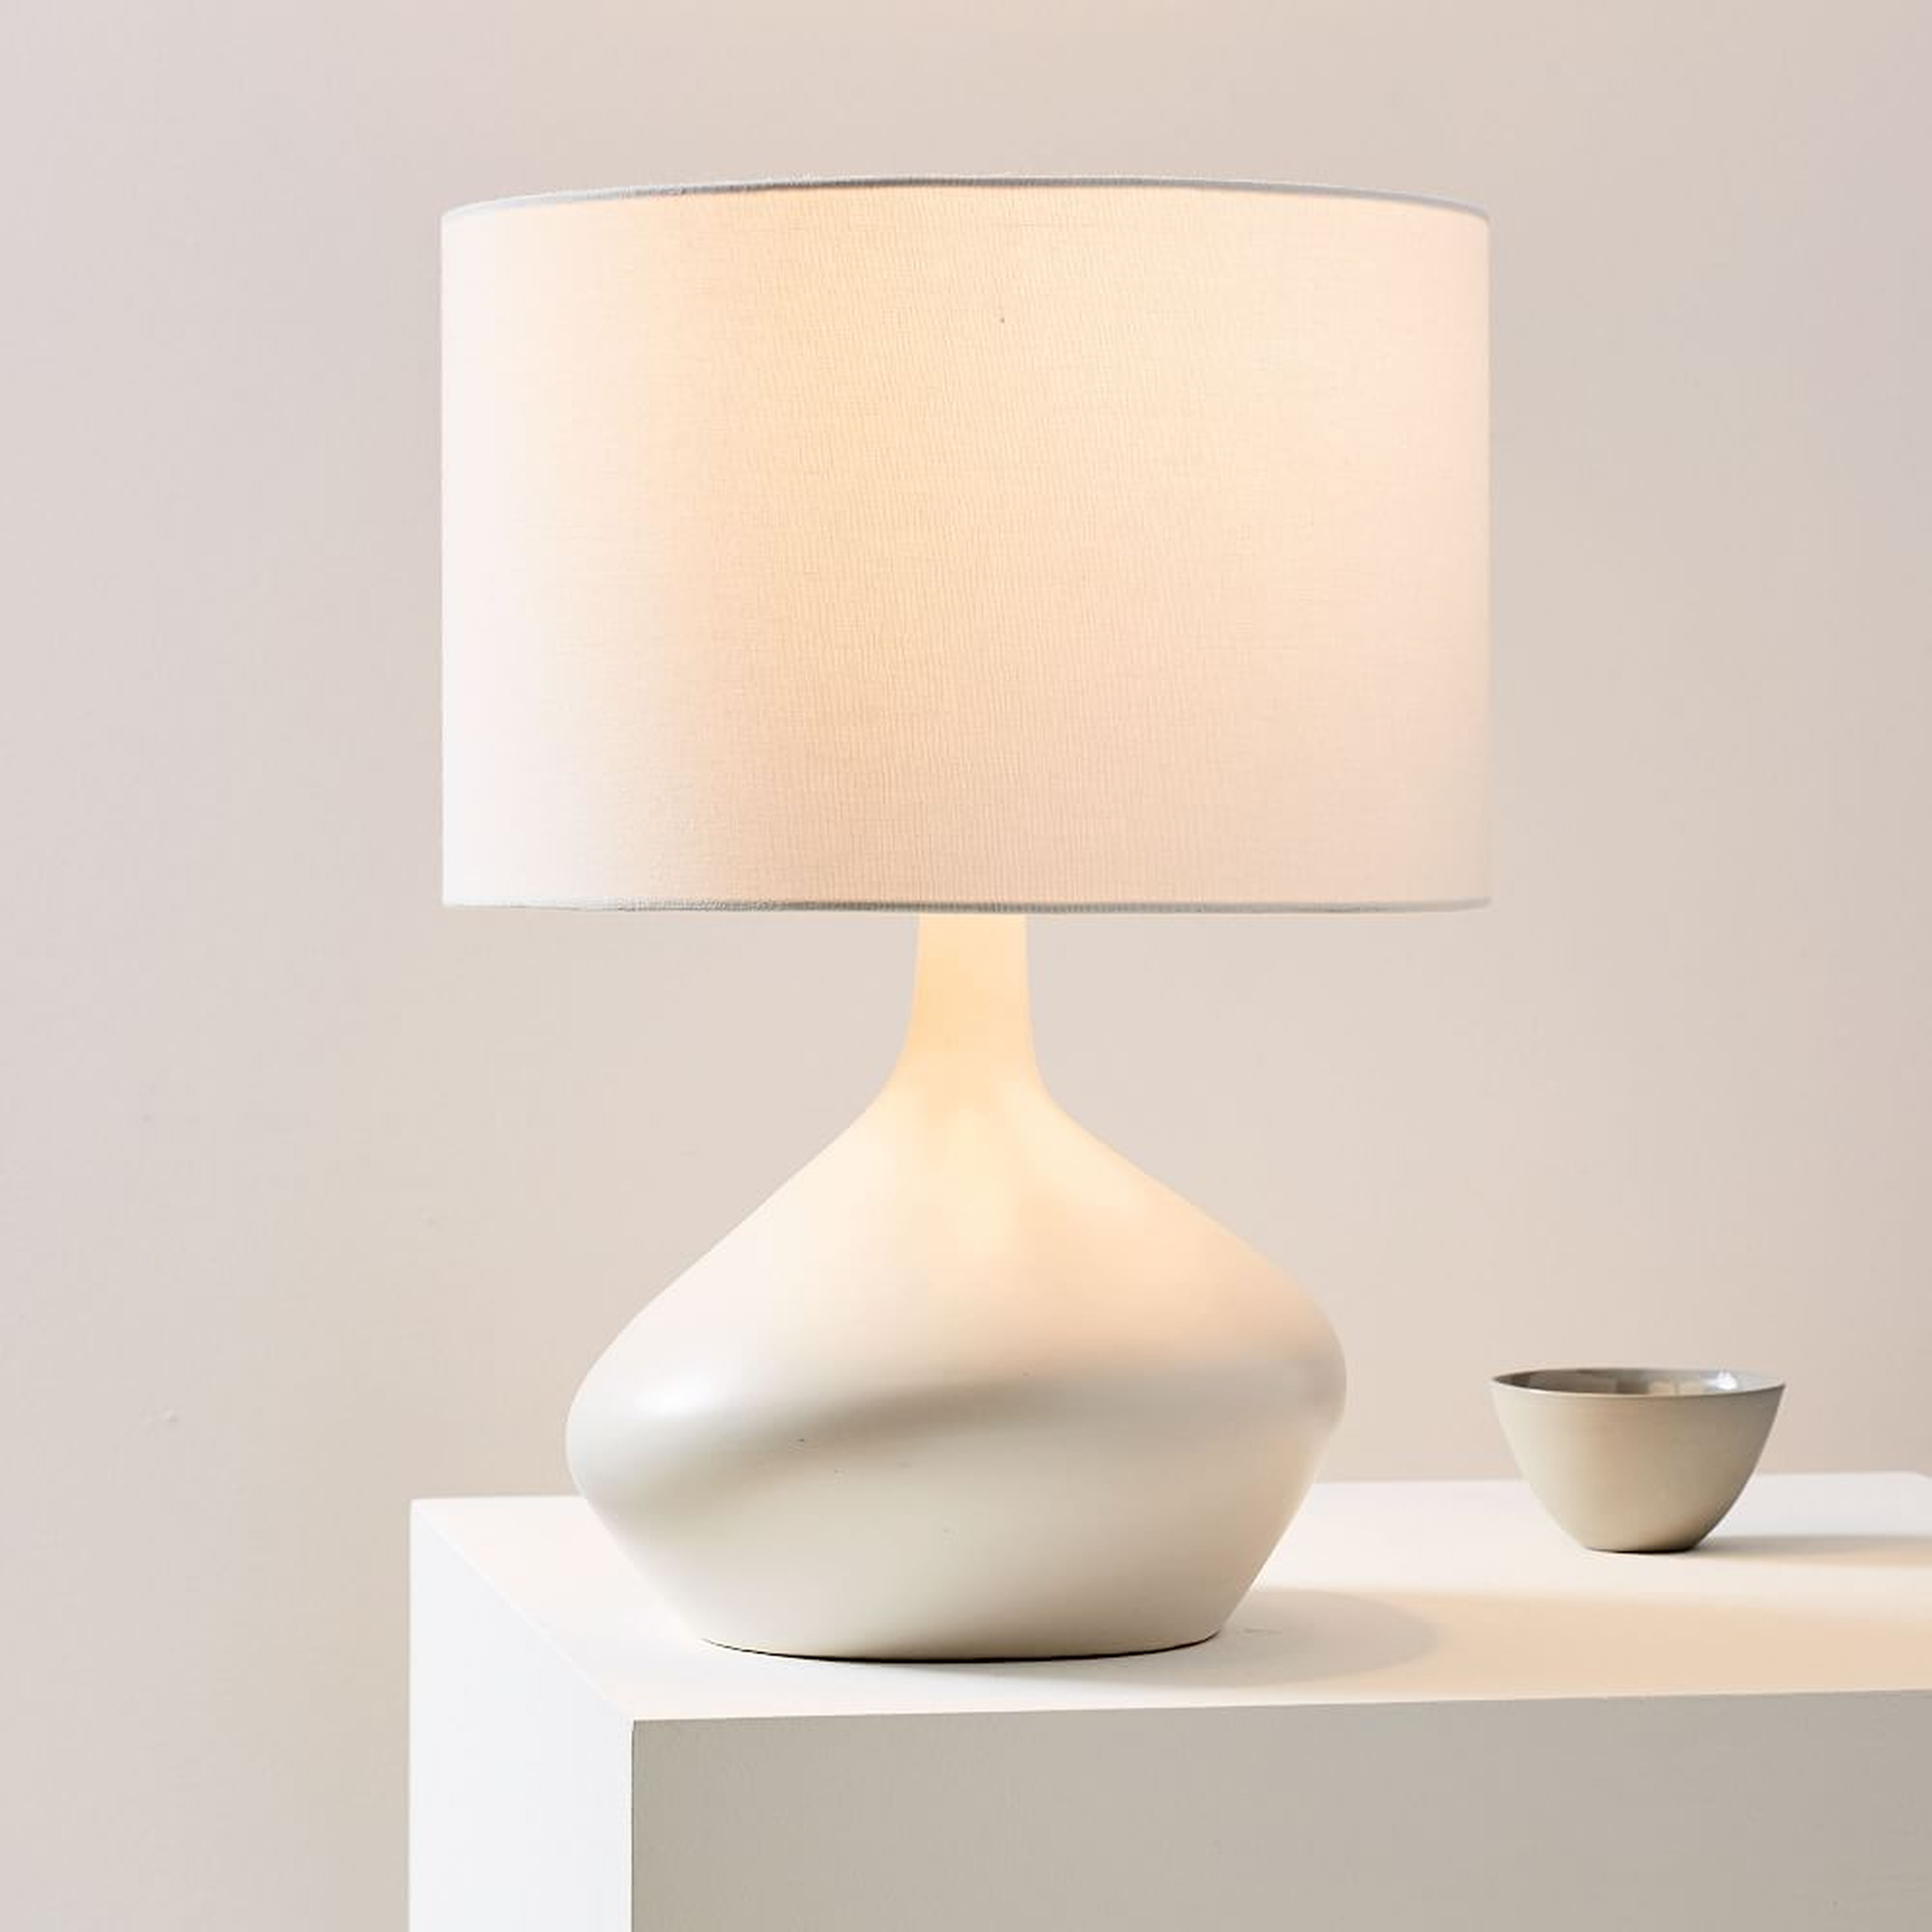 Asymmetry Ceramic Table Lamp, Small, White, Set of 2 - West Elm